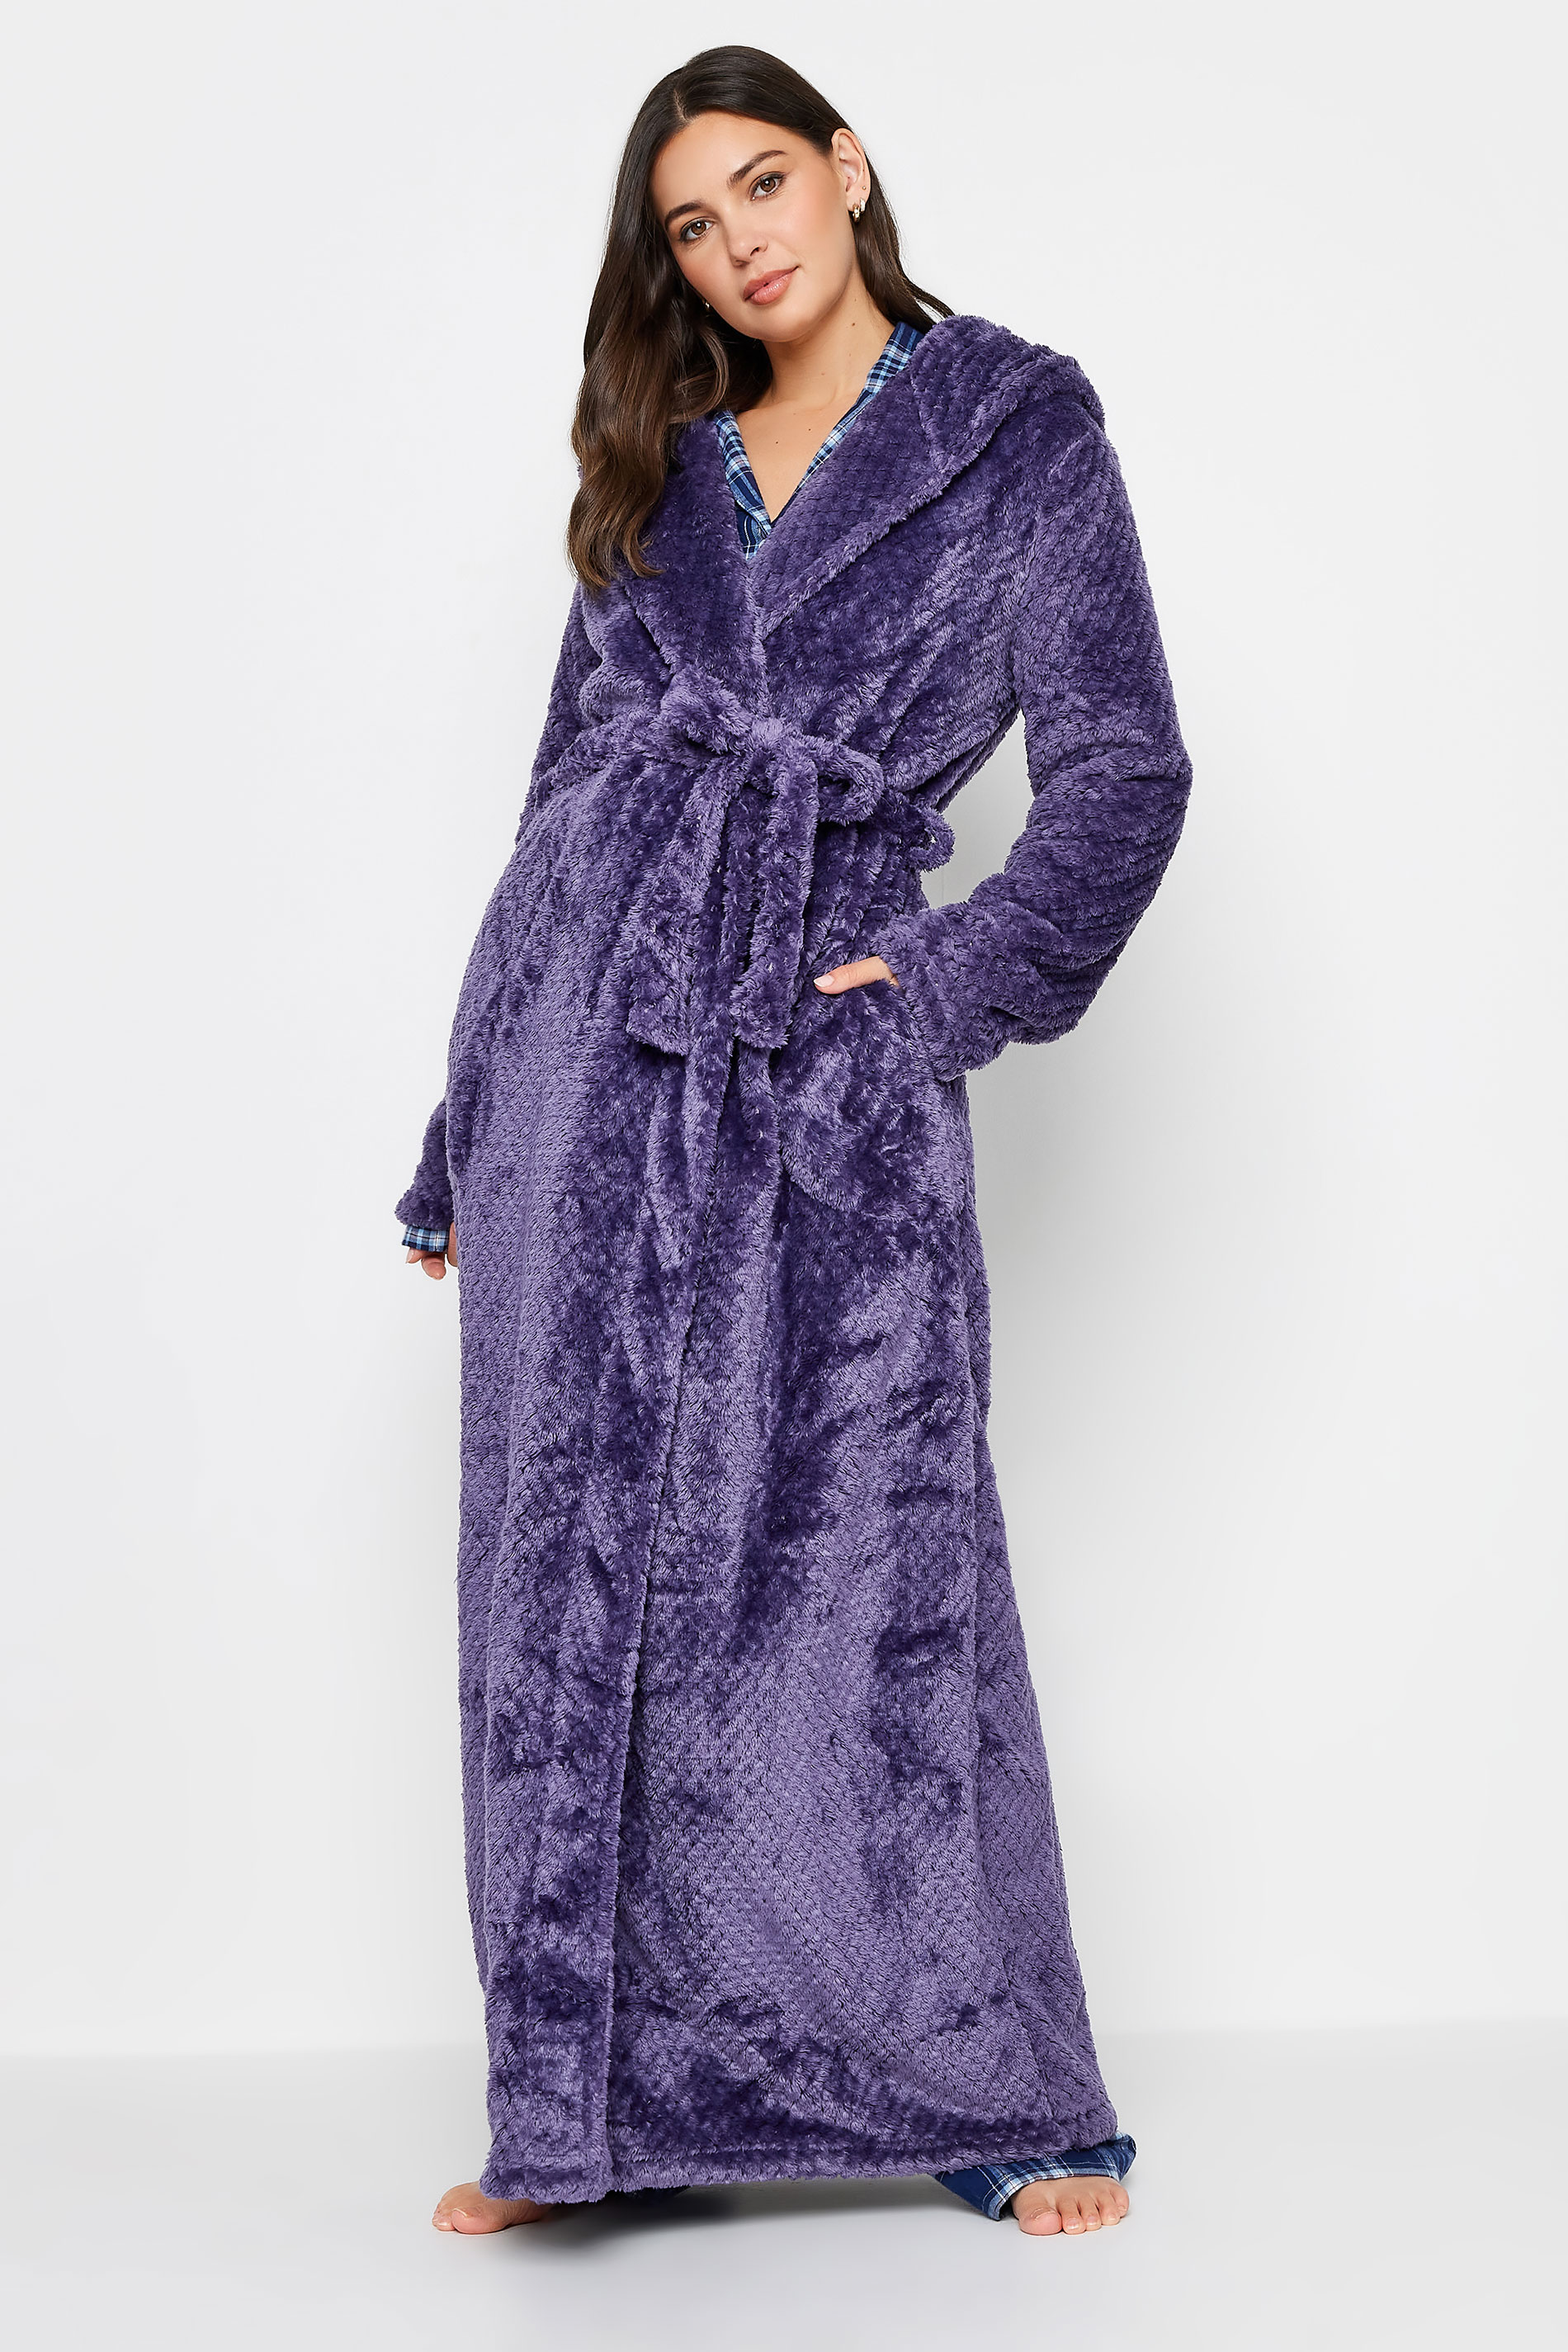 LTS Tall Women's Purple Hooded Maxi Dressing Gown | Long Tall Sally 1